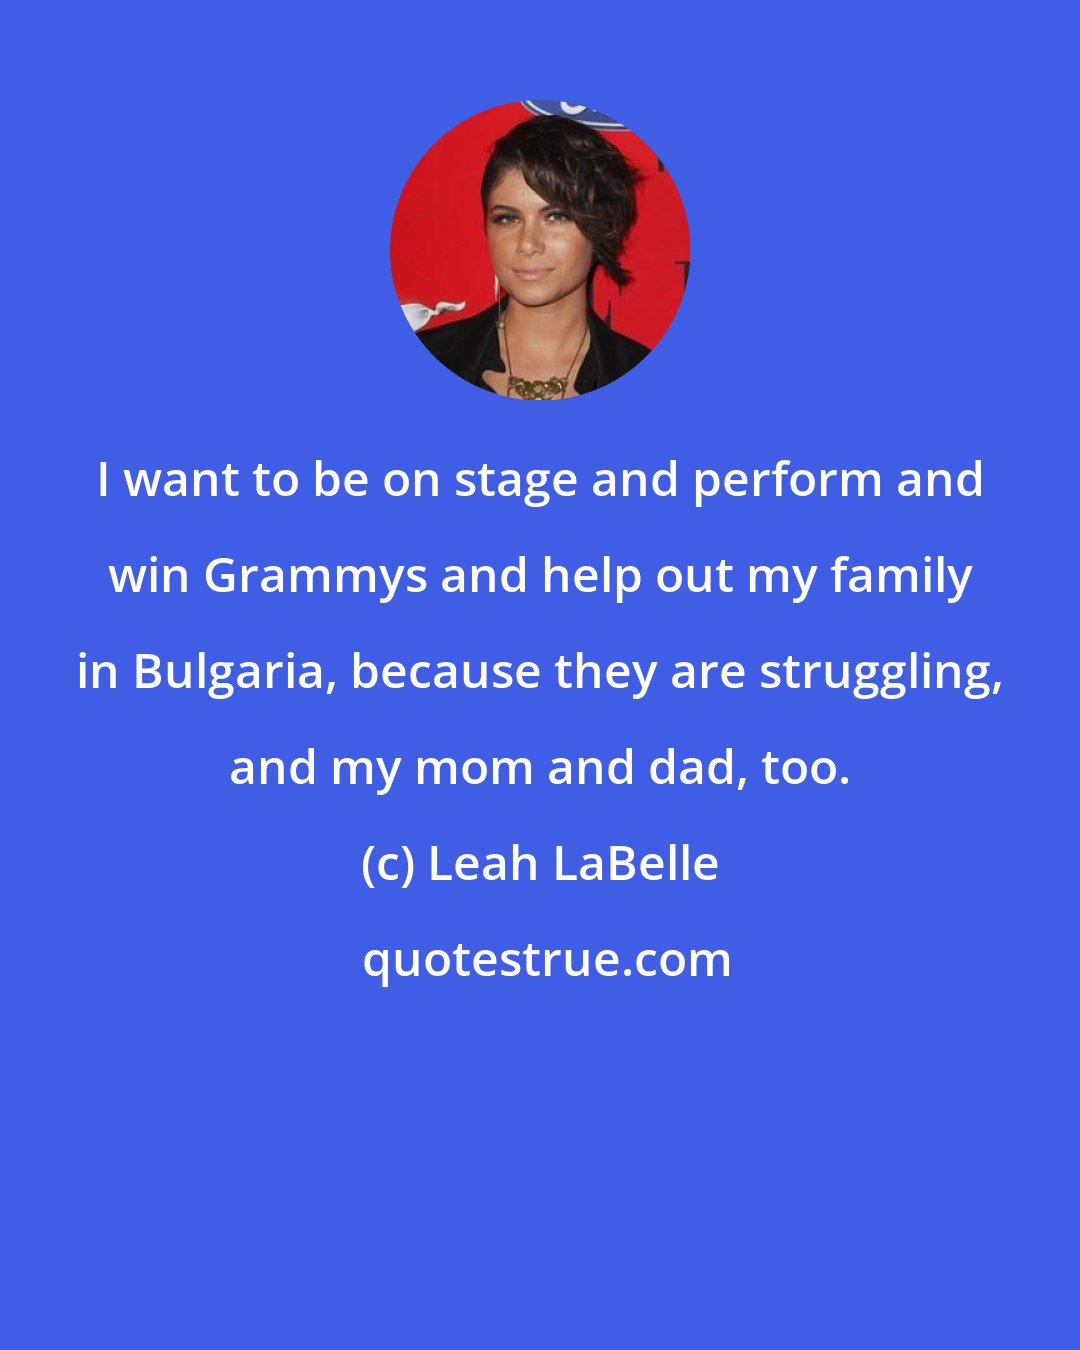 Leah LaBelle: I want to be on stage and perform and win Grammys and help out my family in Bulgaria, because they are struggling, and my mom and dad, too.